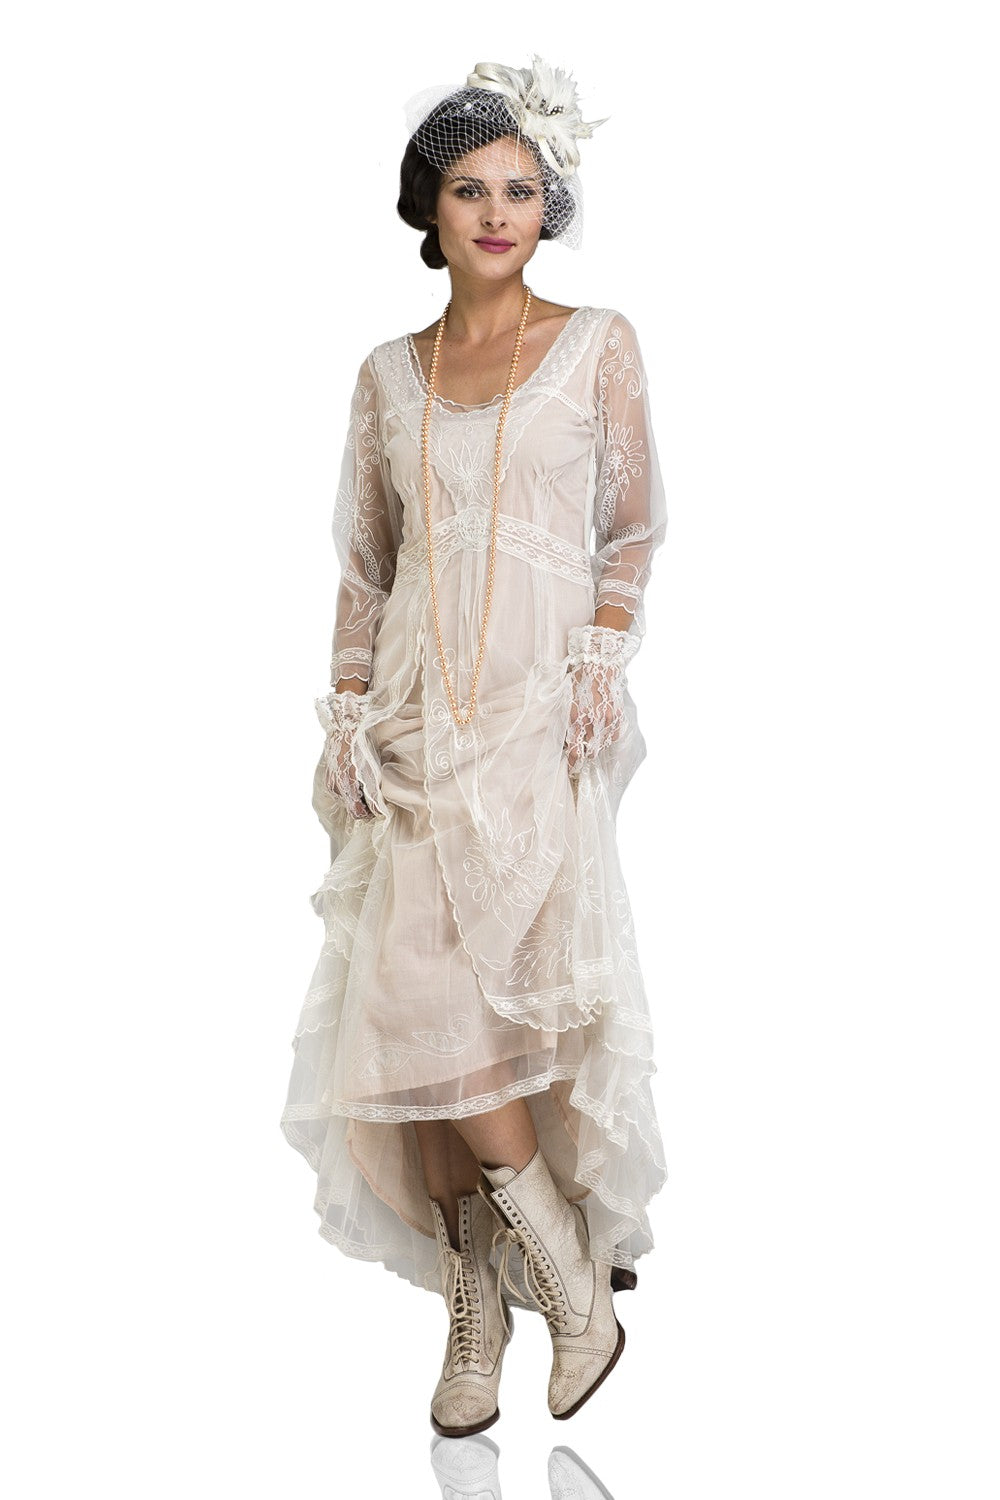 1900s Edwardian Dresses, 1910s Dresses Downton Abbey Tea Party Gown in Ivory by Nataya $275.00 AT vintagedancer.com